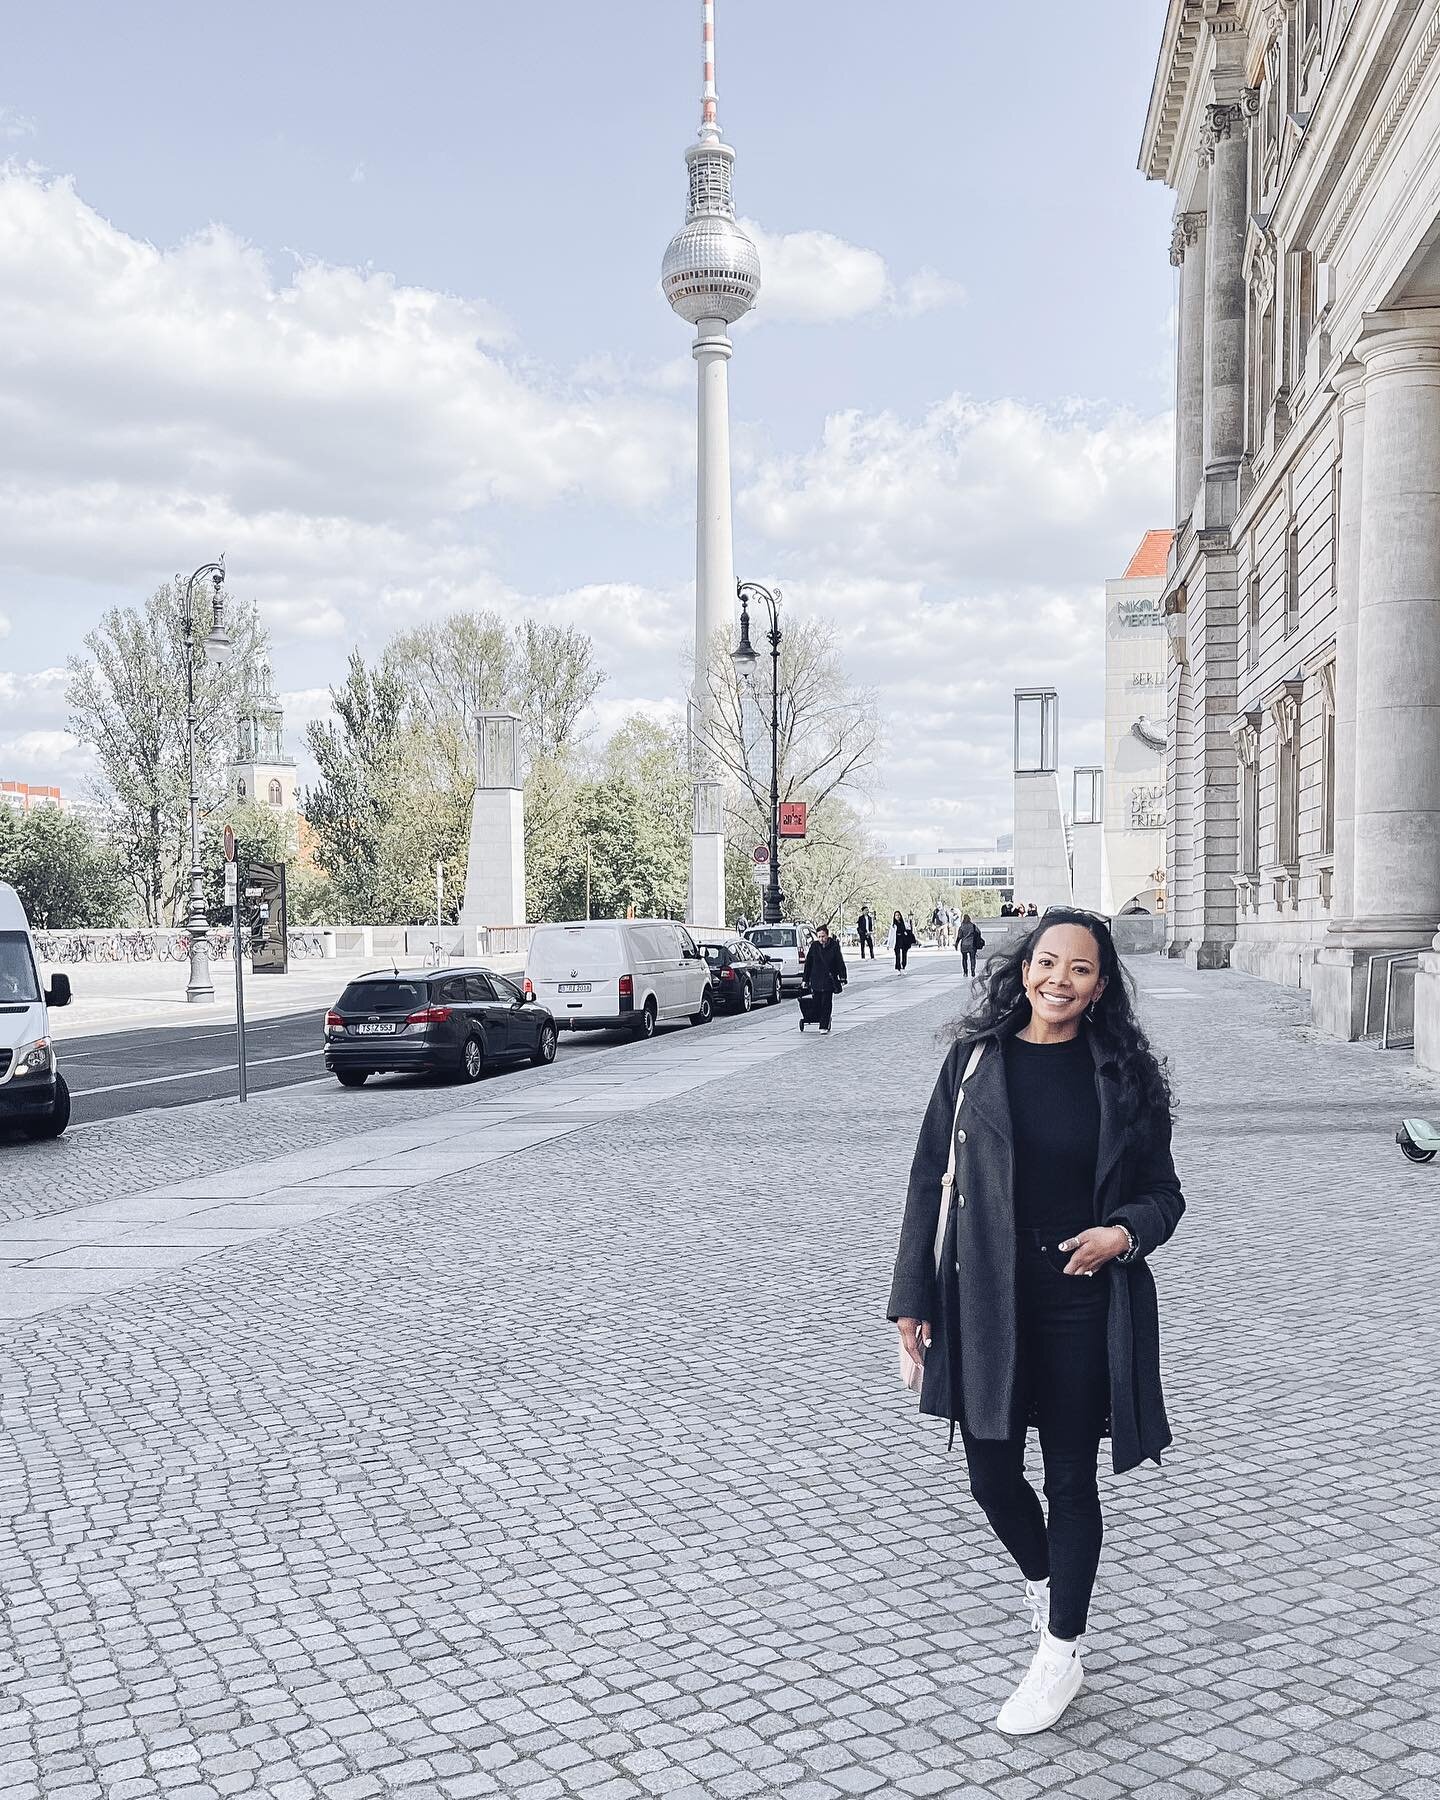 There's something magical about wandering the streets of Berlin, Germany. 🏙️ From the rich history to the modern-day culture, this city has it all. Walking around I grabbed this quick shot in front of the TV Tower. The TV Tower in Berlin, Germany is